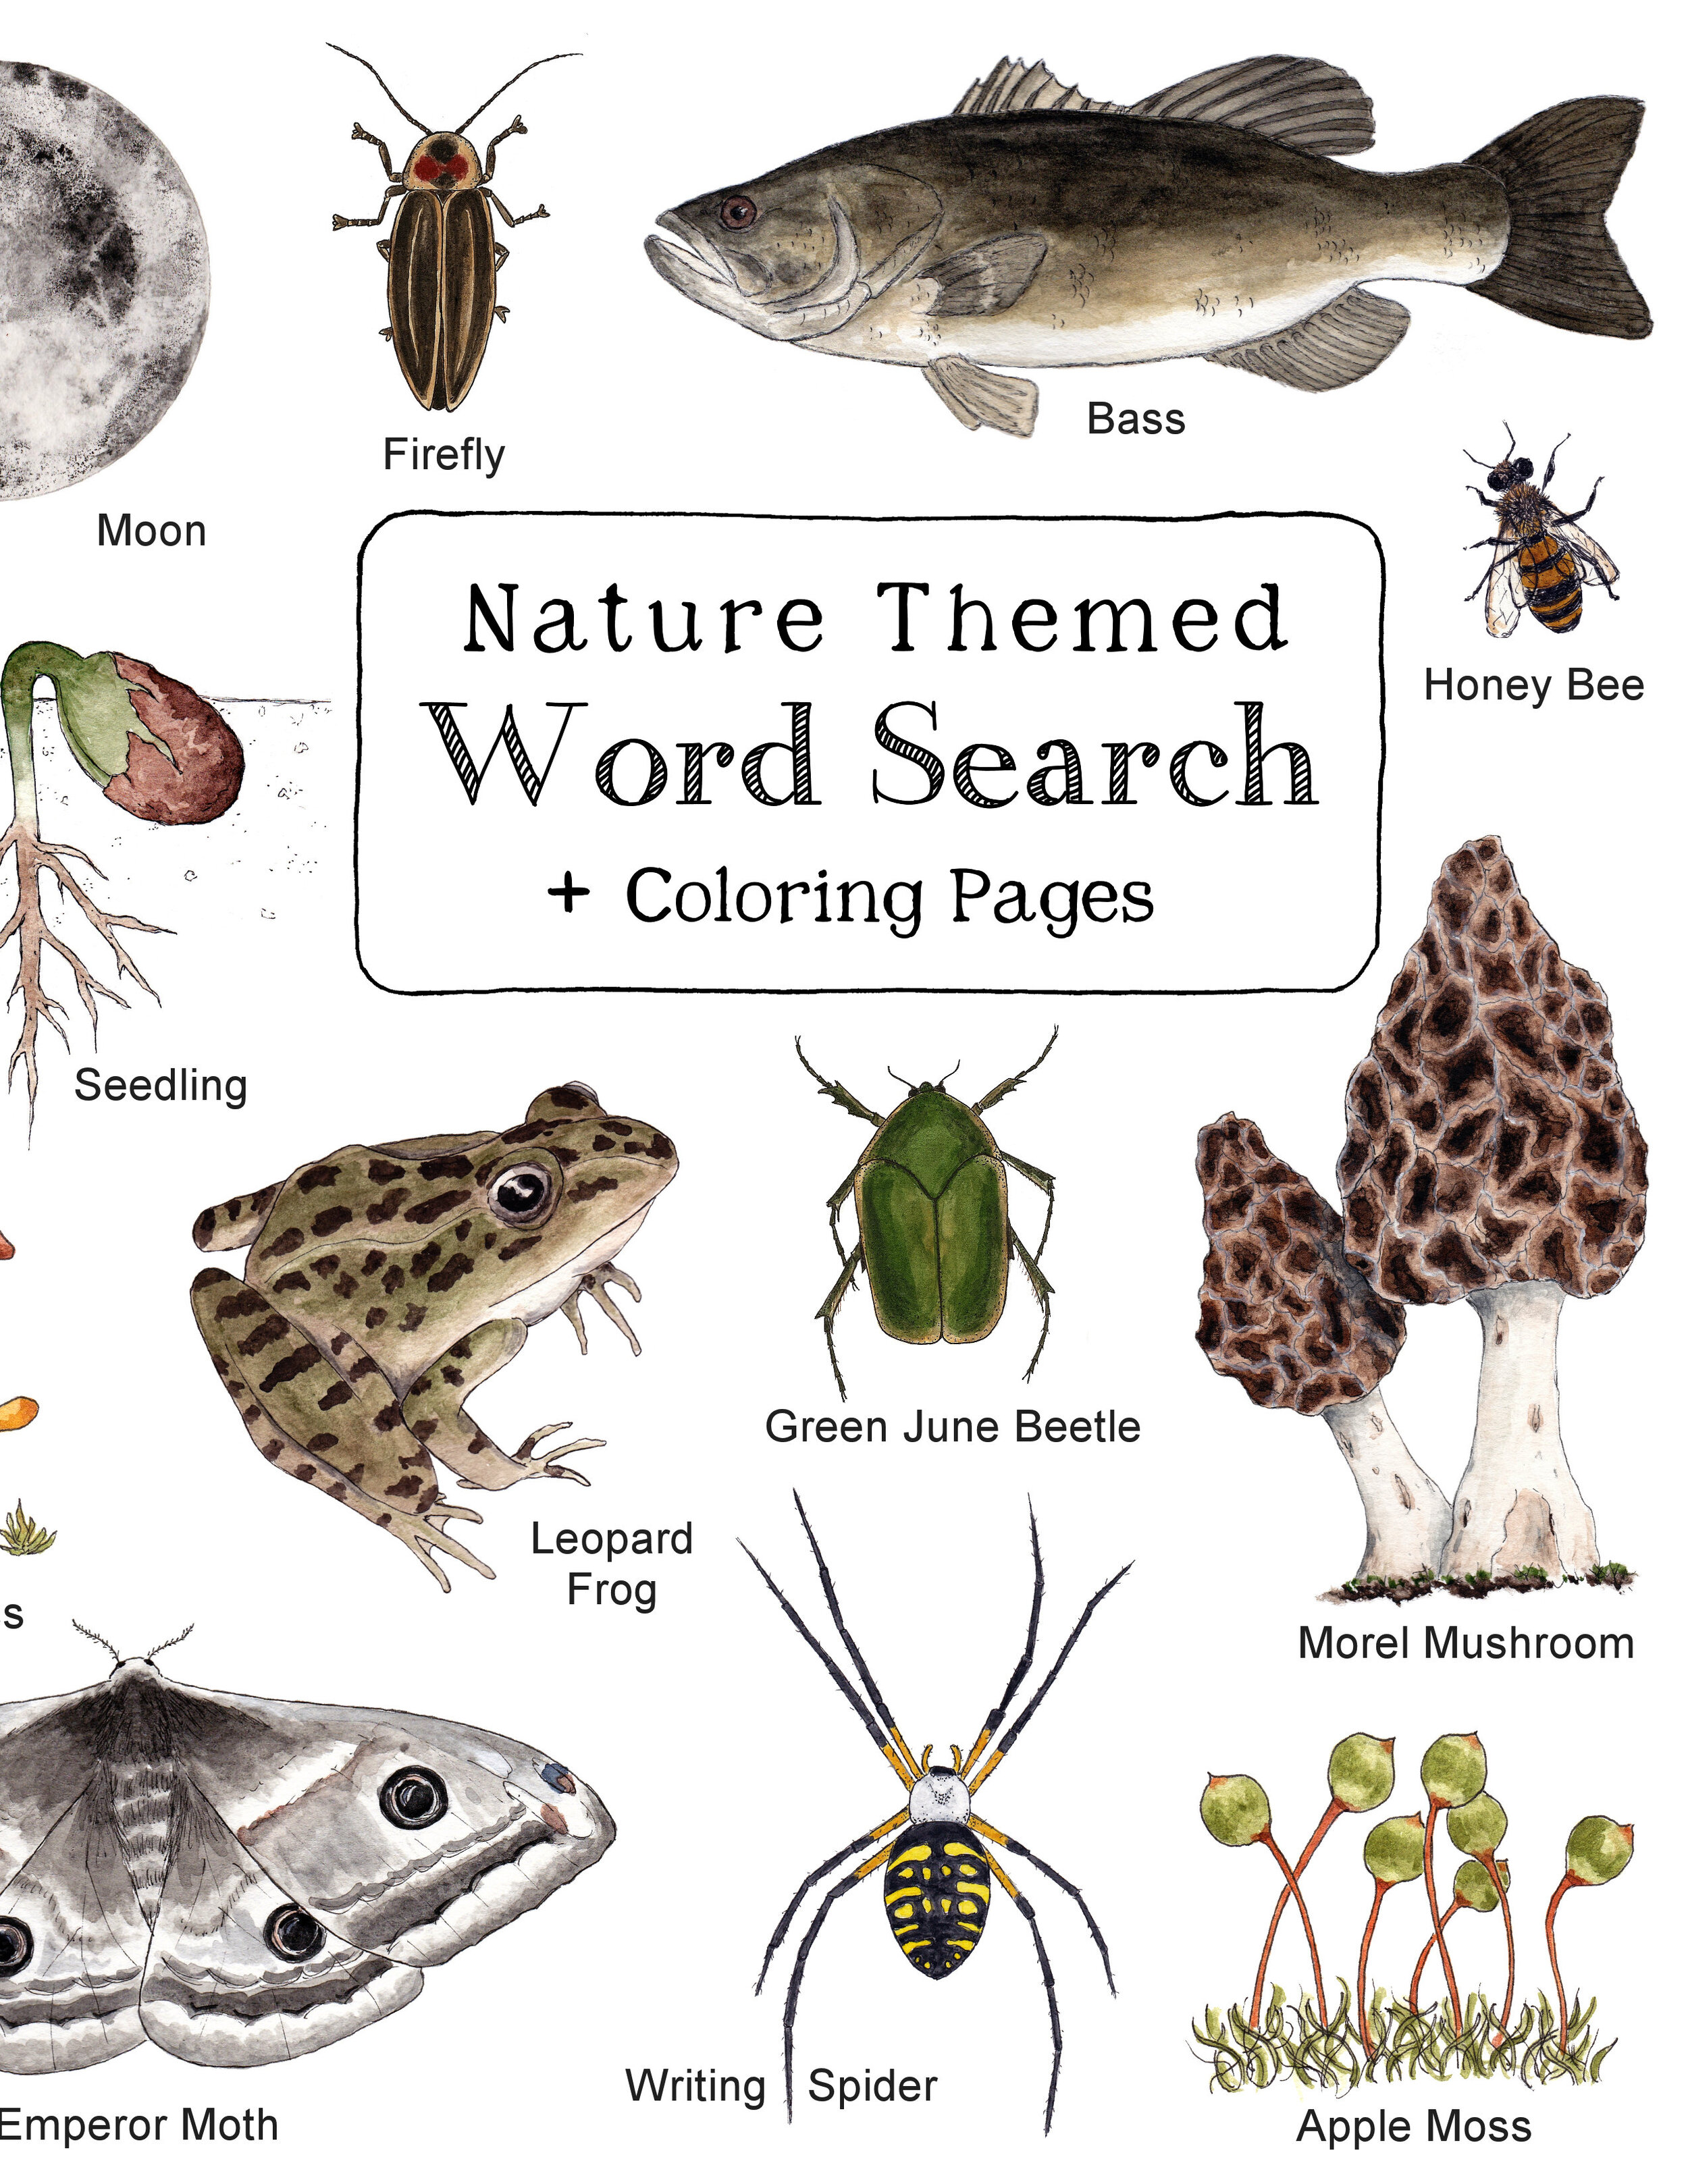 Nature Themed Word Search & Coloring Pages